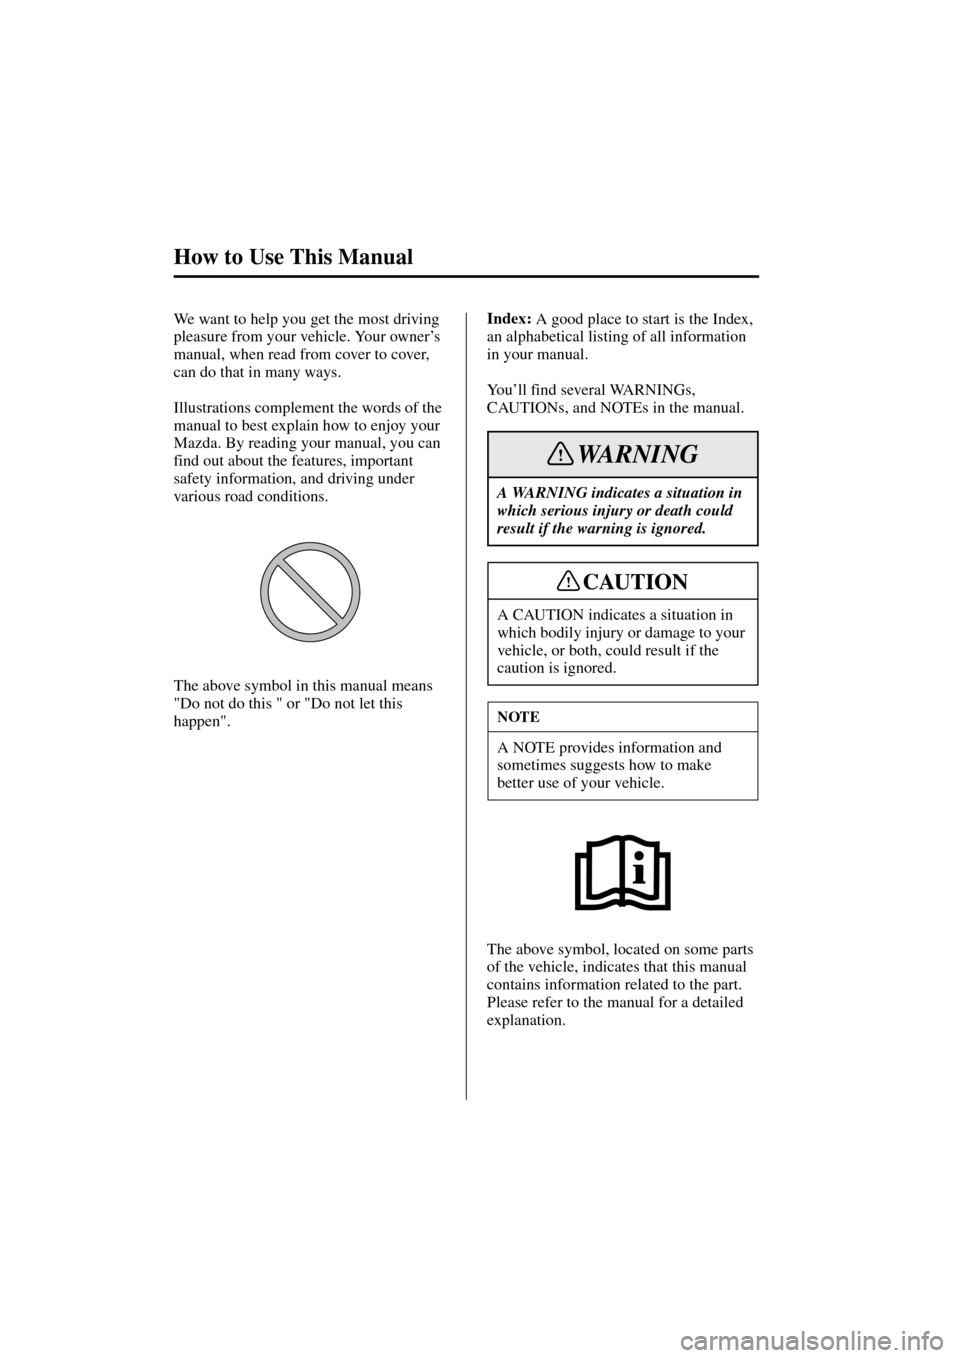 MAZDA MODEL MPV 2004  Owners Manual (in English) How to Use This Manual
Form No. 8S06-EA-03H
We want to help you get the most driving 
pleasure from your vehicle. Your owner’s 
manual, when read from cover to cover, 
can do that in many ways.
Illu